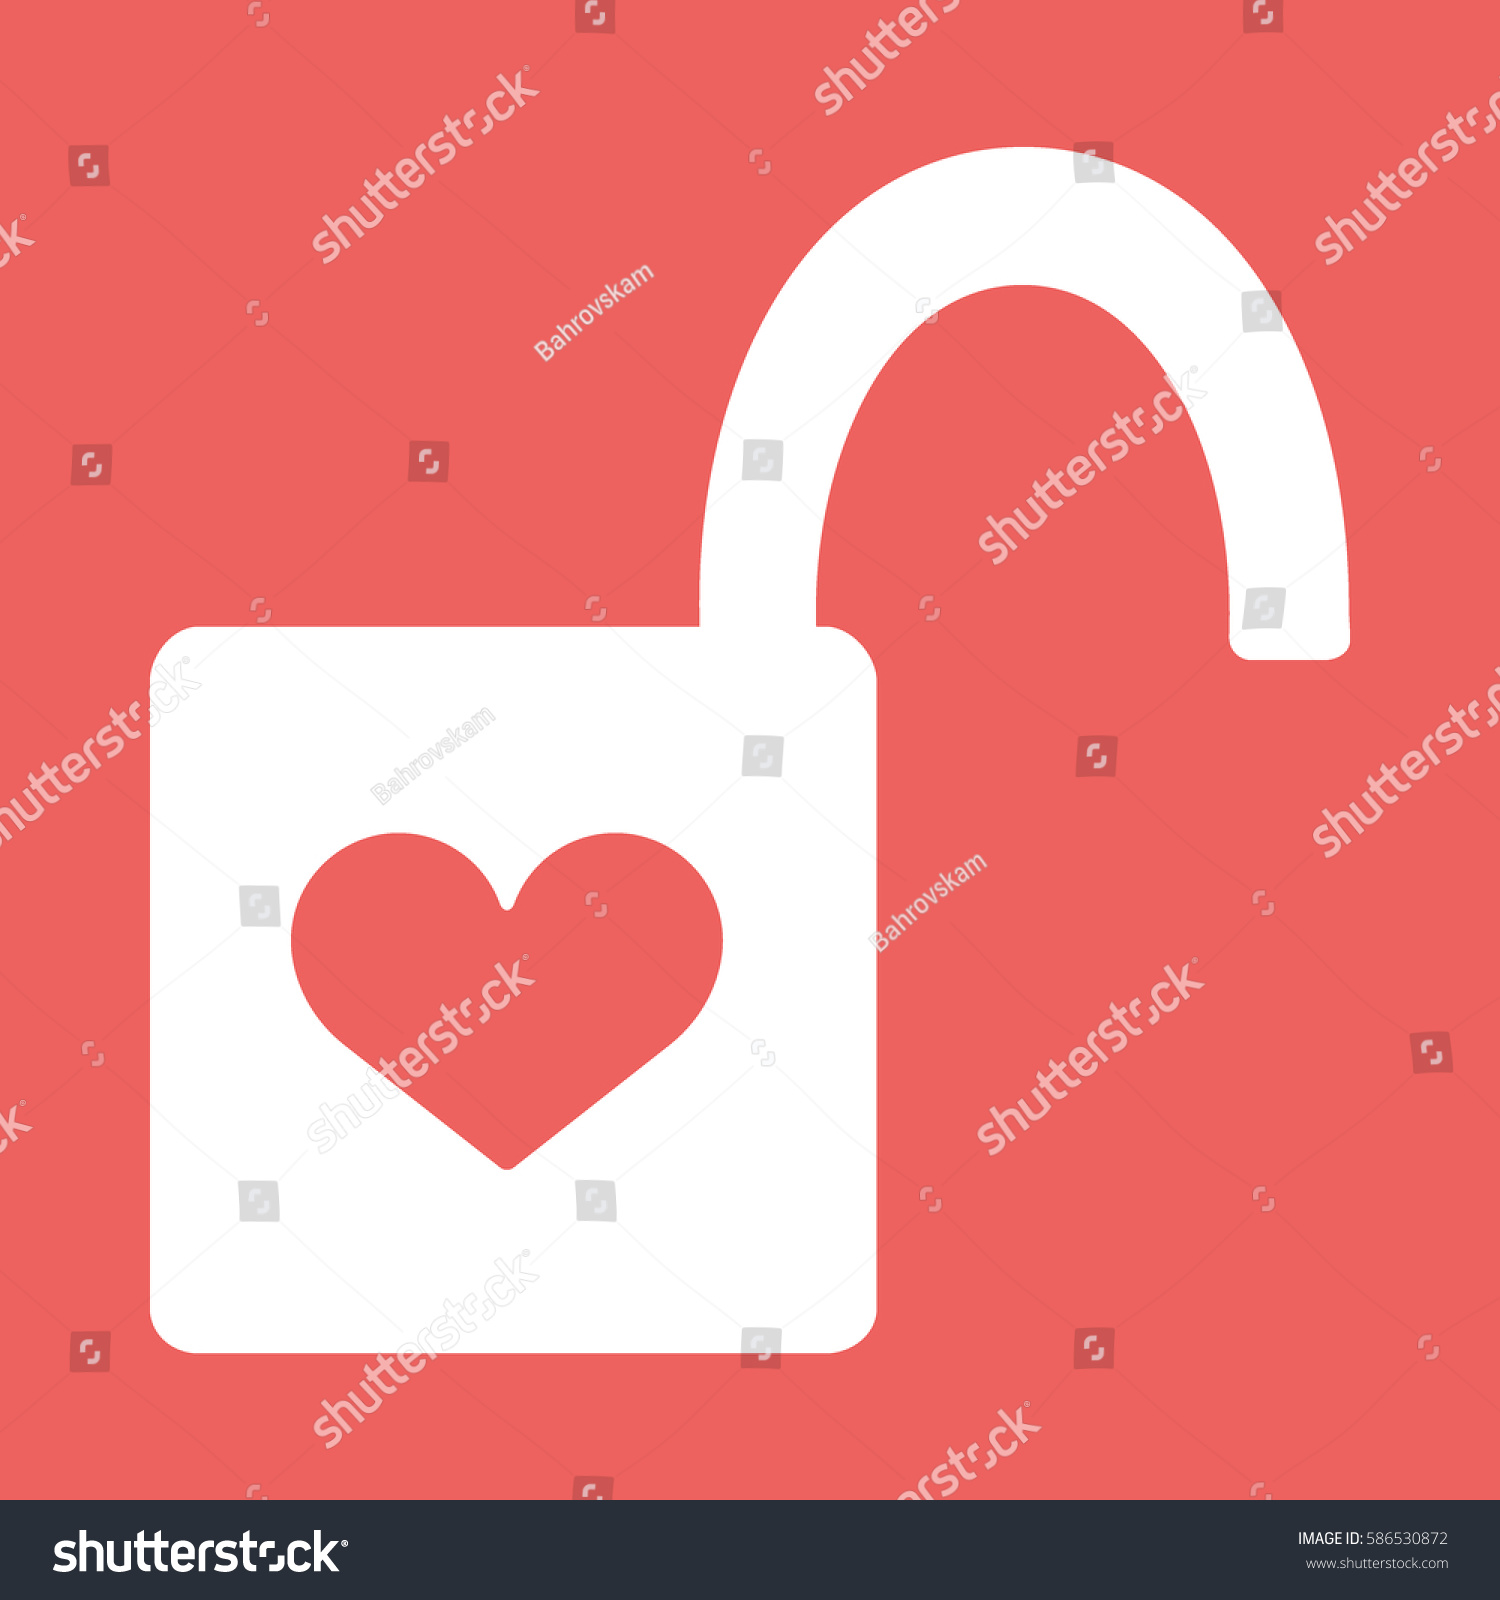 Open Heart Symbol Text Images - Symbol and Sign Ideas